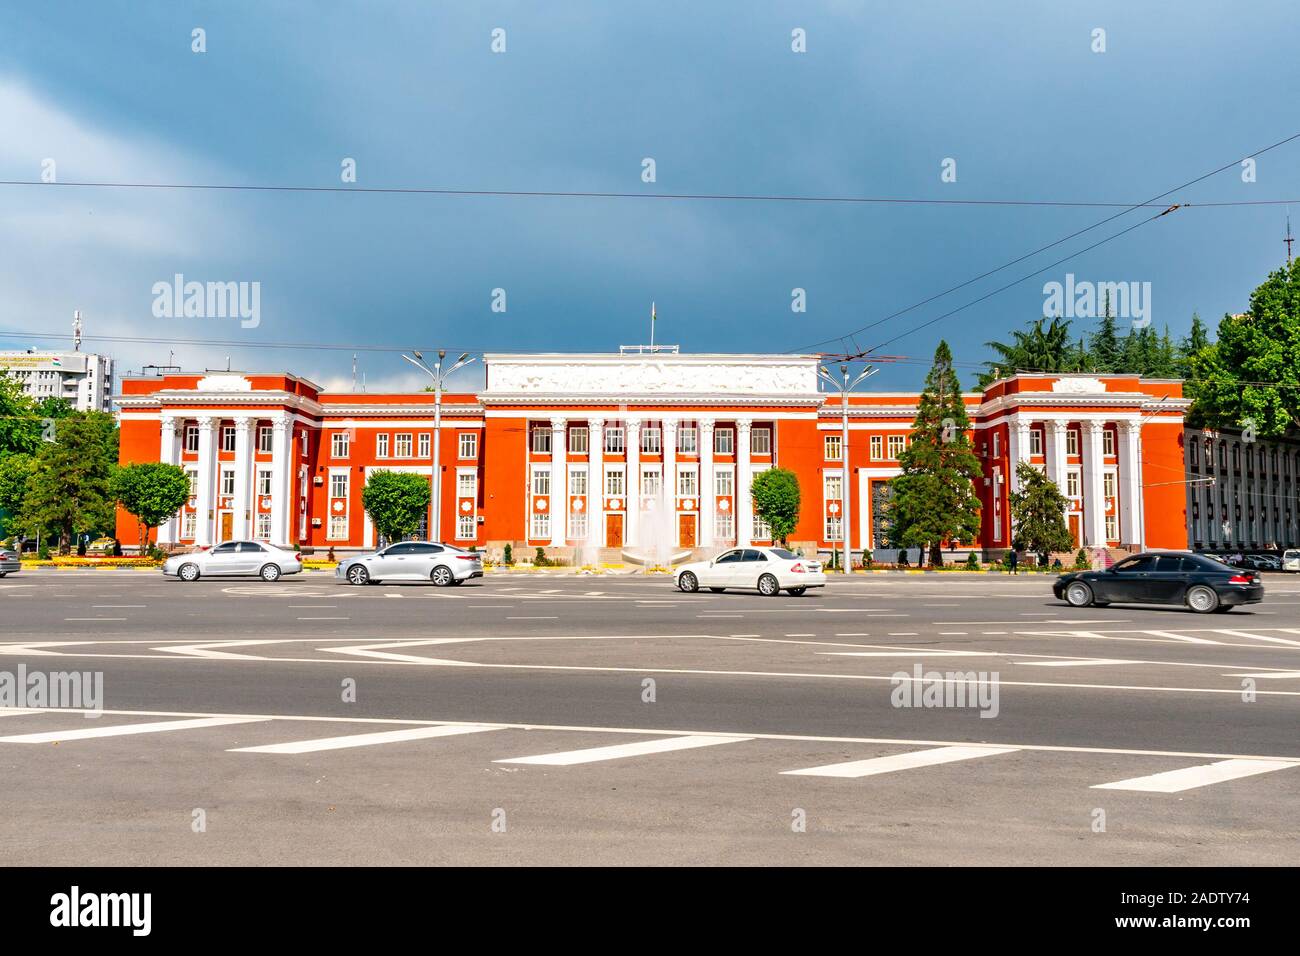 Dushanbe Parliament of the Republic of Tajikistan Breathtaking Picturesque View with Traffic on a Sunny Blue Sky Day Stock Photo